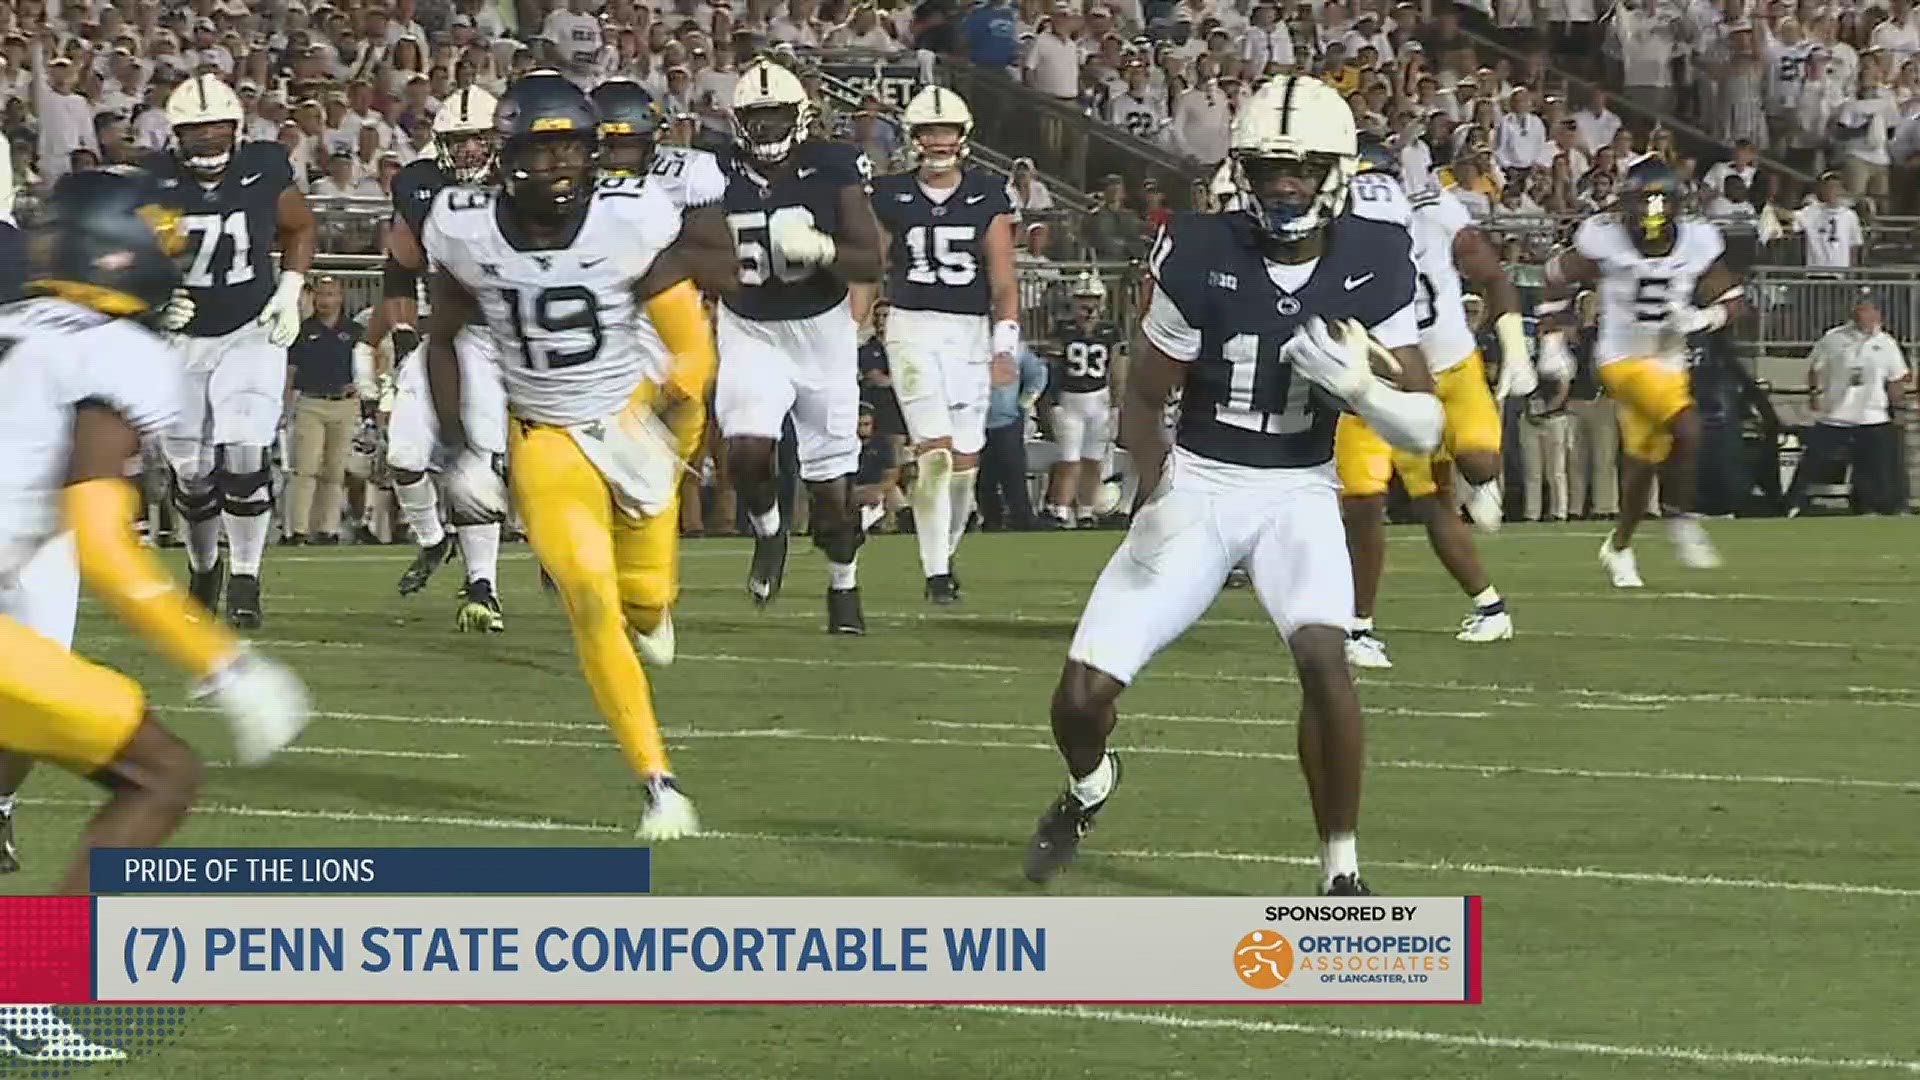 Nittany Lions defense shuts down Mountaineers while offense gains momentum in second half